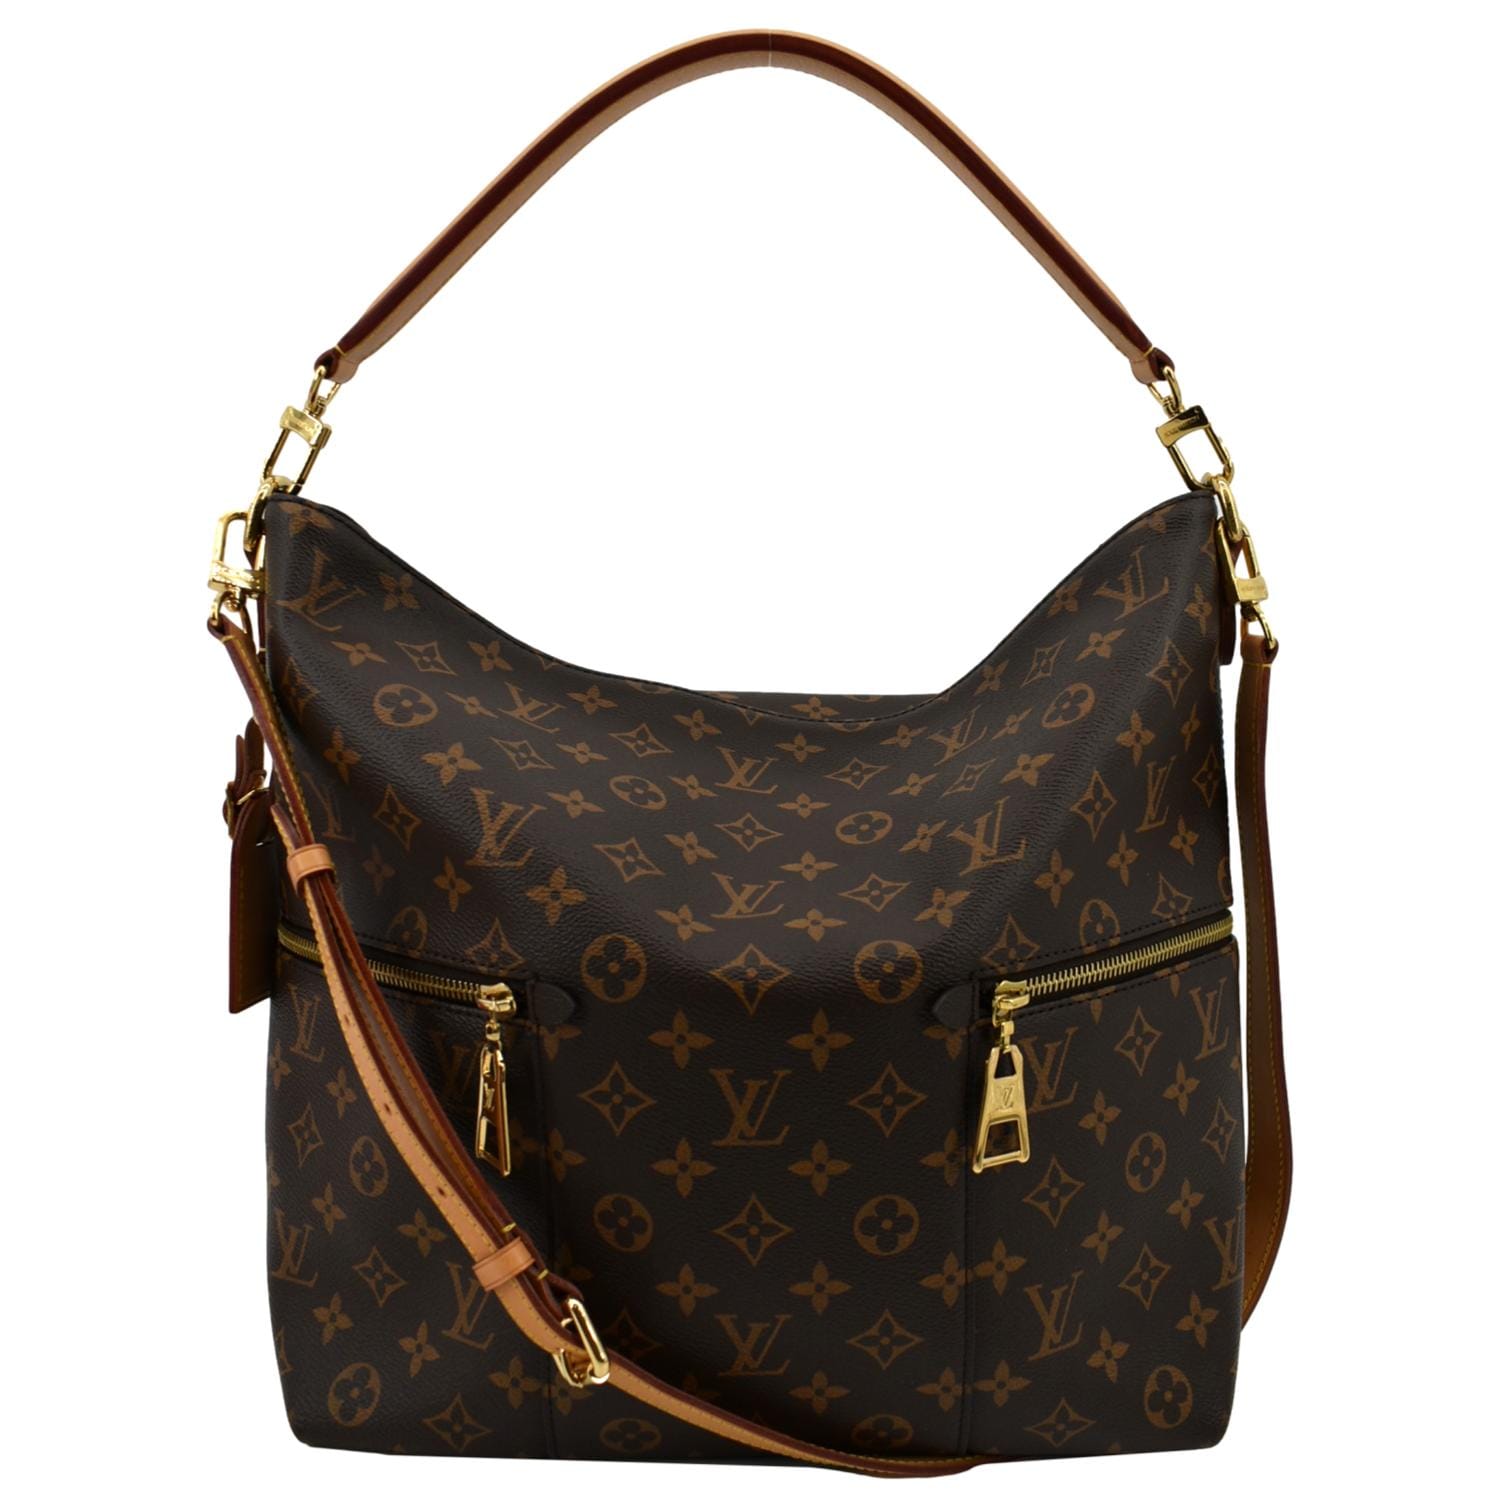 Louis Vuitton Discontinued Bags: The Most Iconic Bags Ever